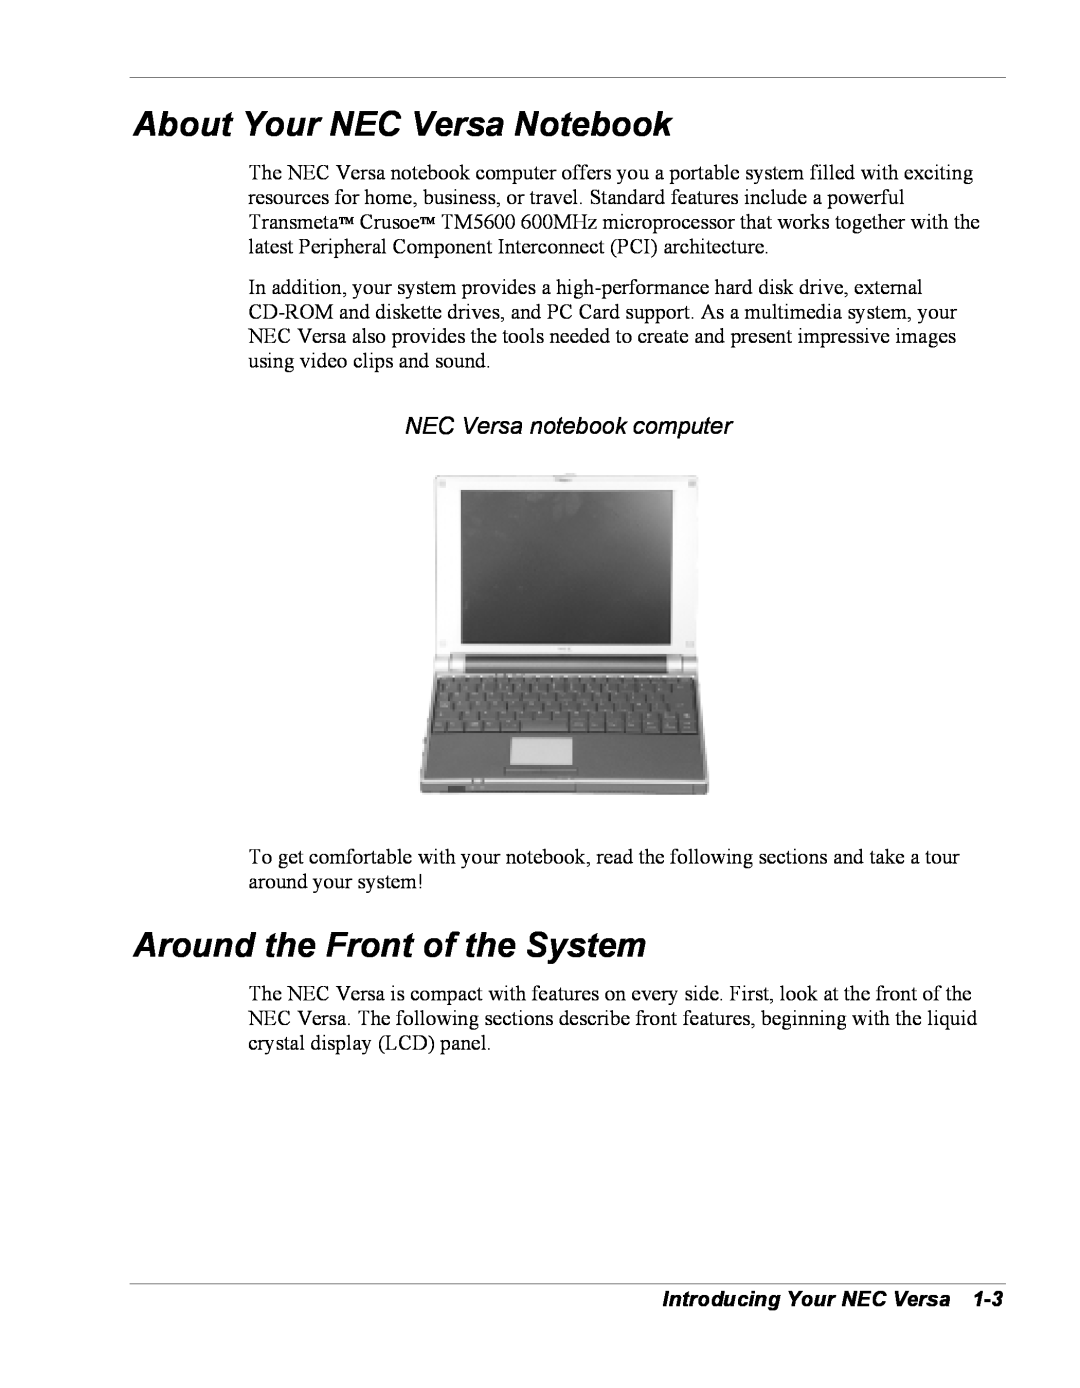 NEC Versa Series manual About Your NEC Versa Notebook, Around the Front of the System, NEC Versa notebook computer 